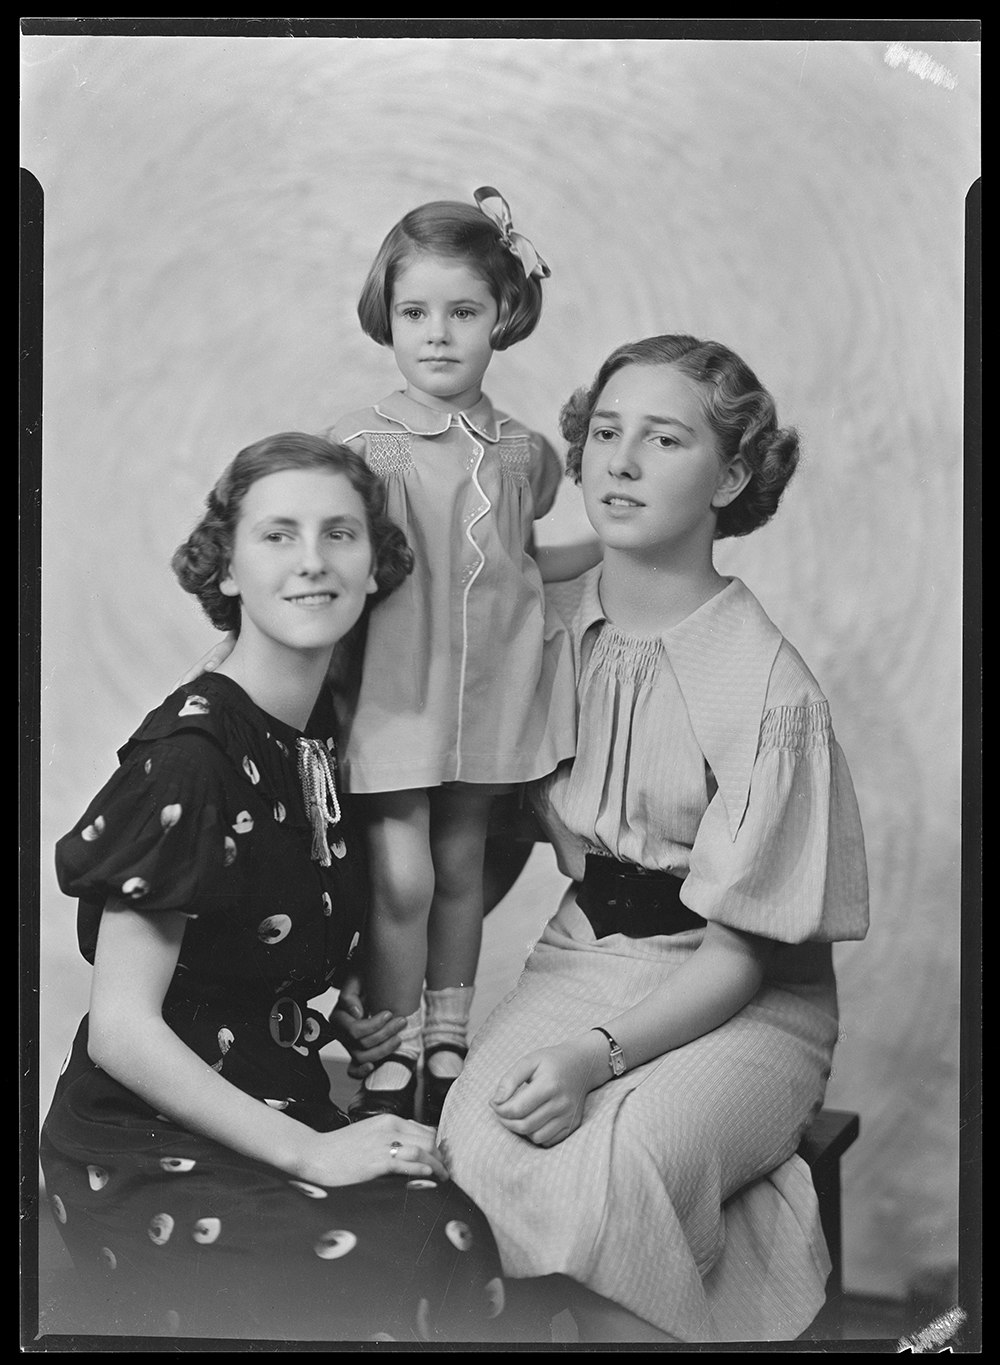 Black and white photo of two women with a girl standing between them on a pedestal. They are in a photographic studio.